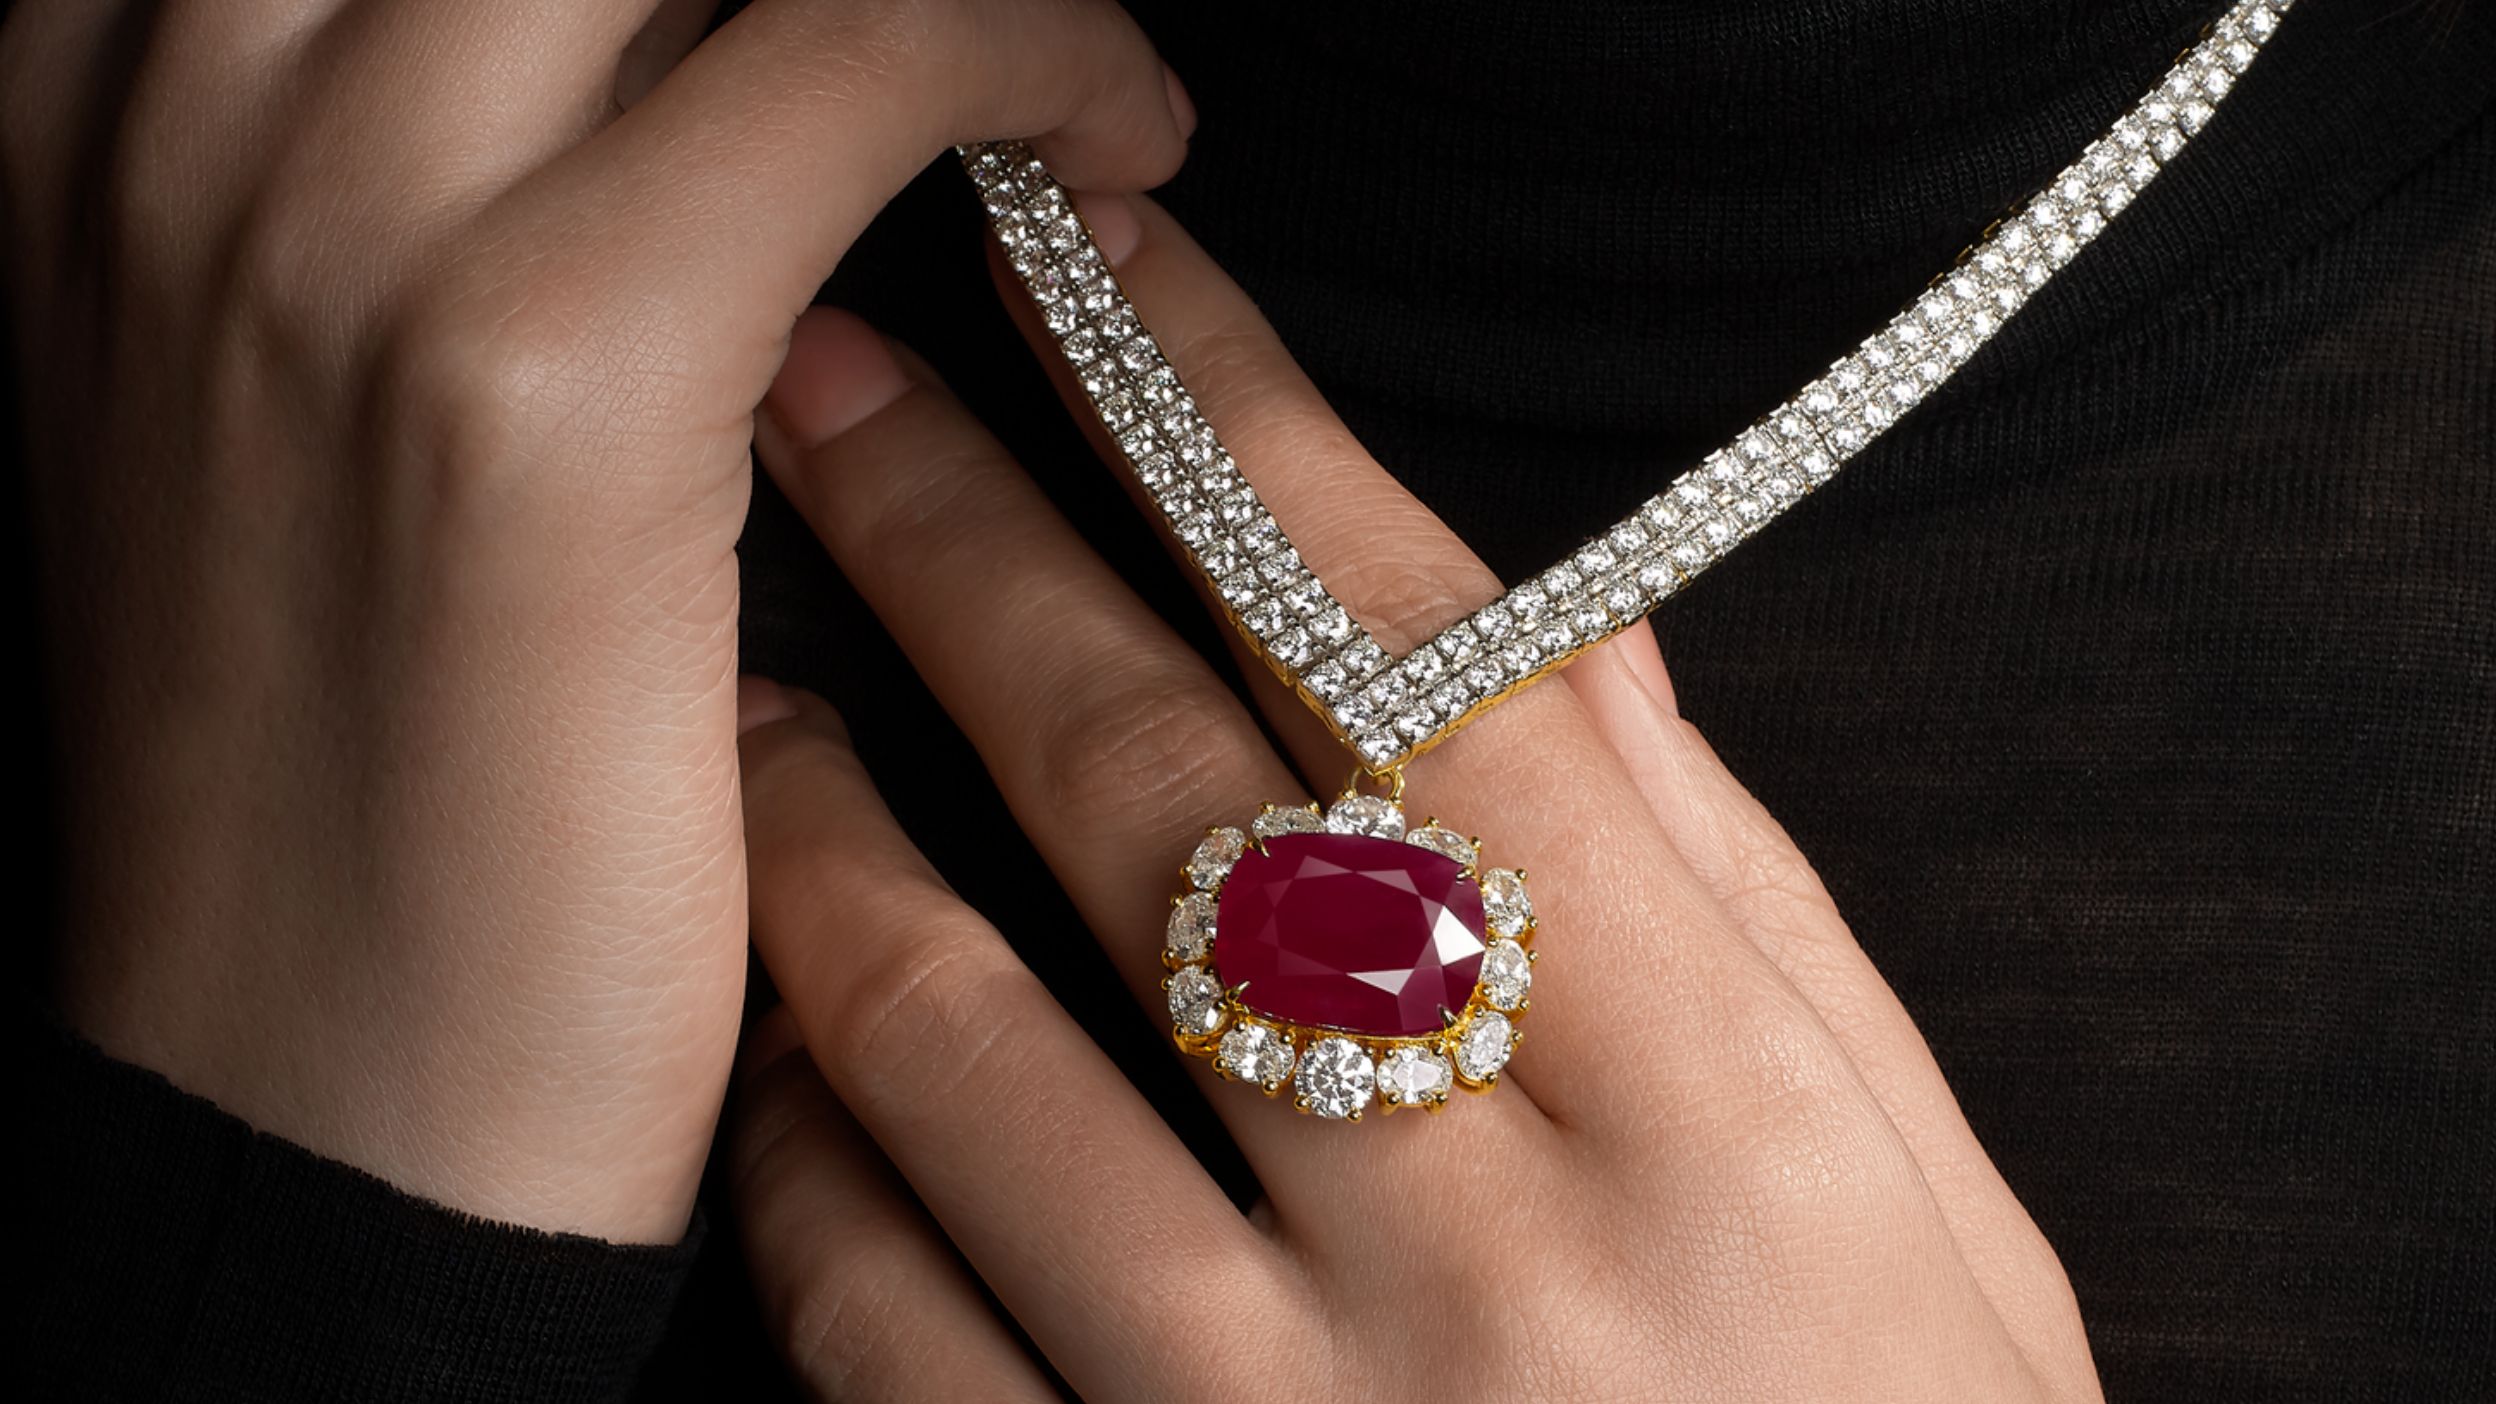 Call of Ruby: Dubbed “The King of Coloured Stones”, rubies have been a long-time favourite of royalties and warriors alike.